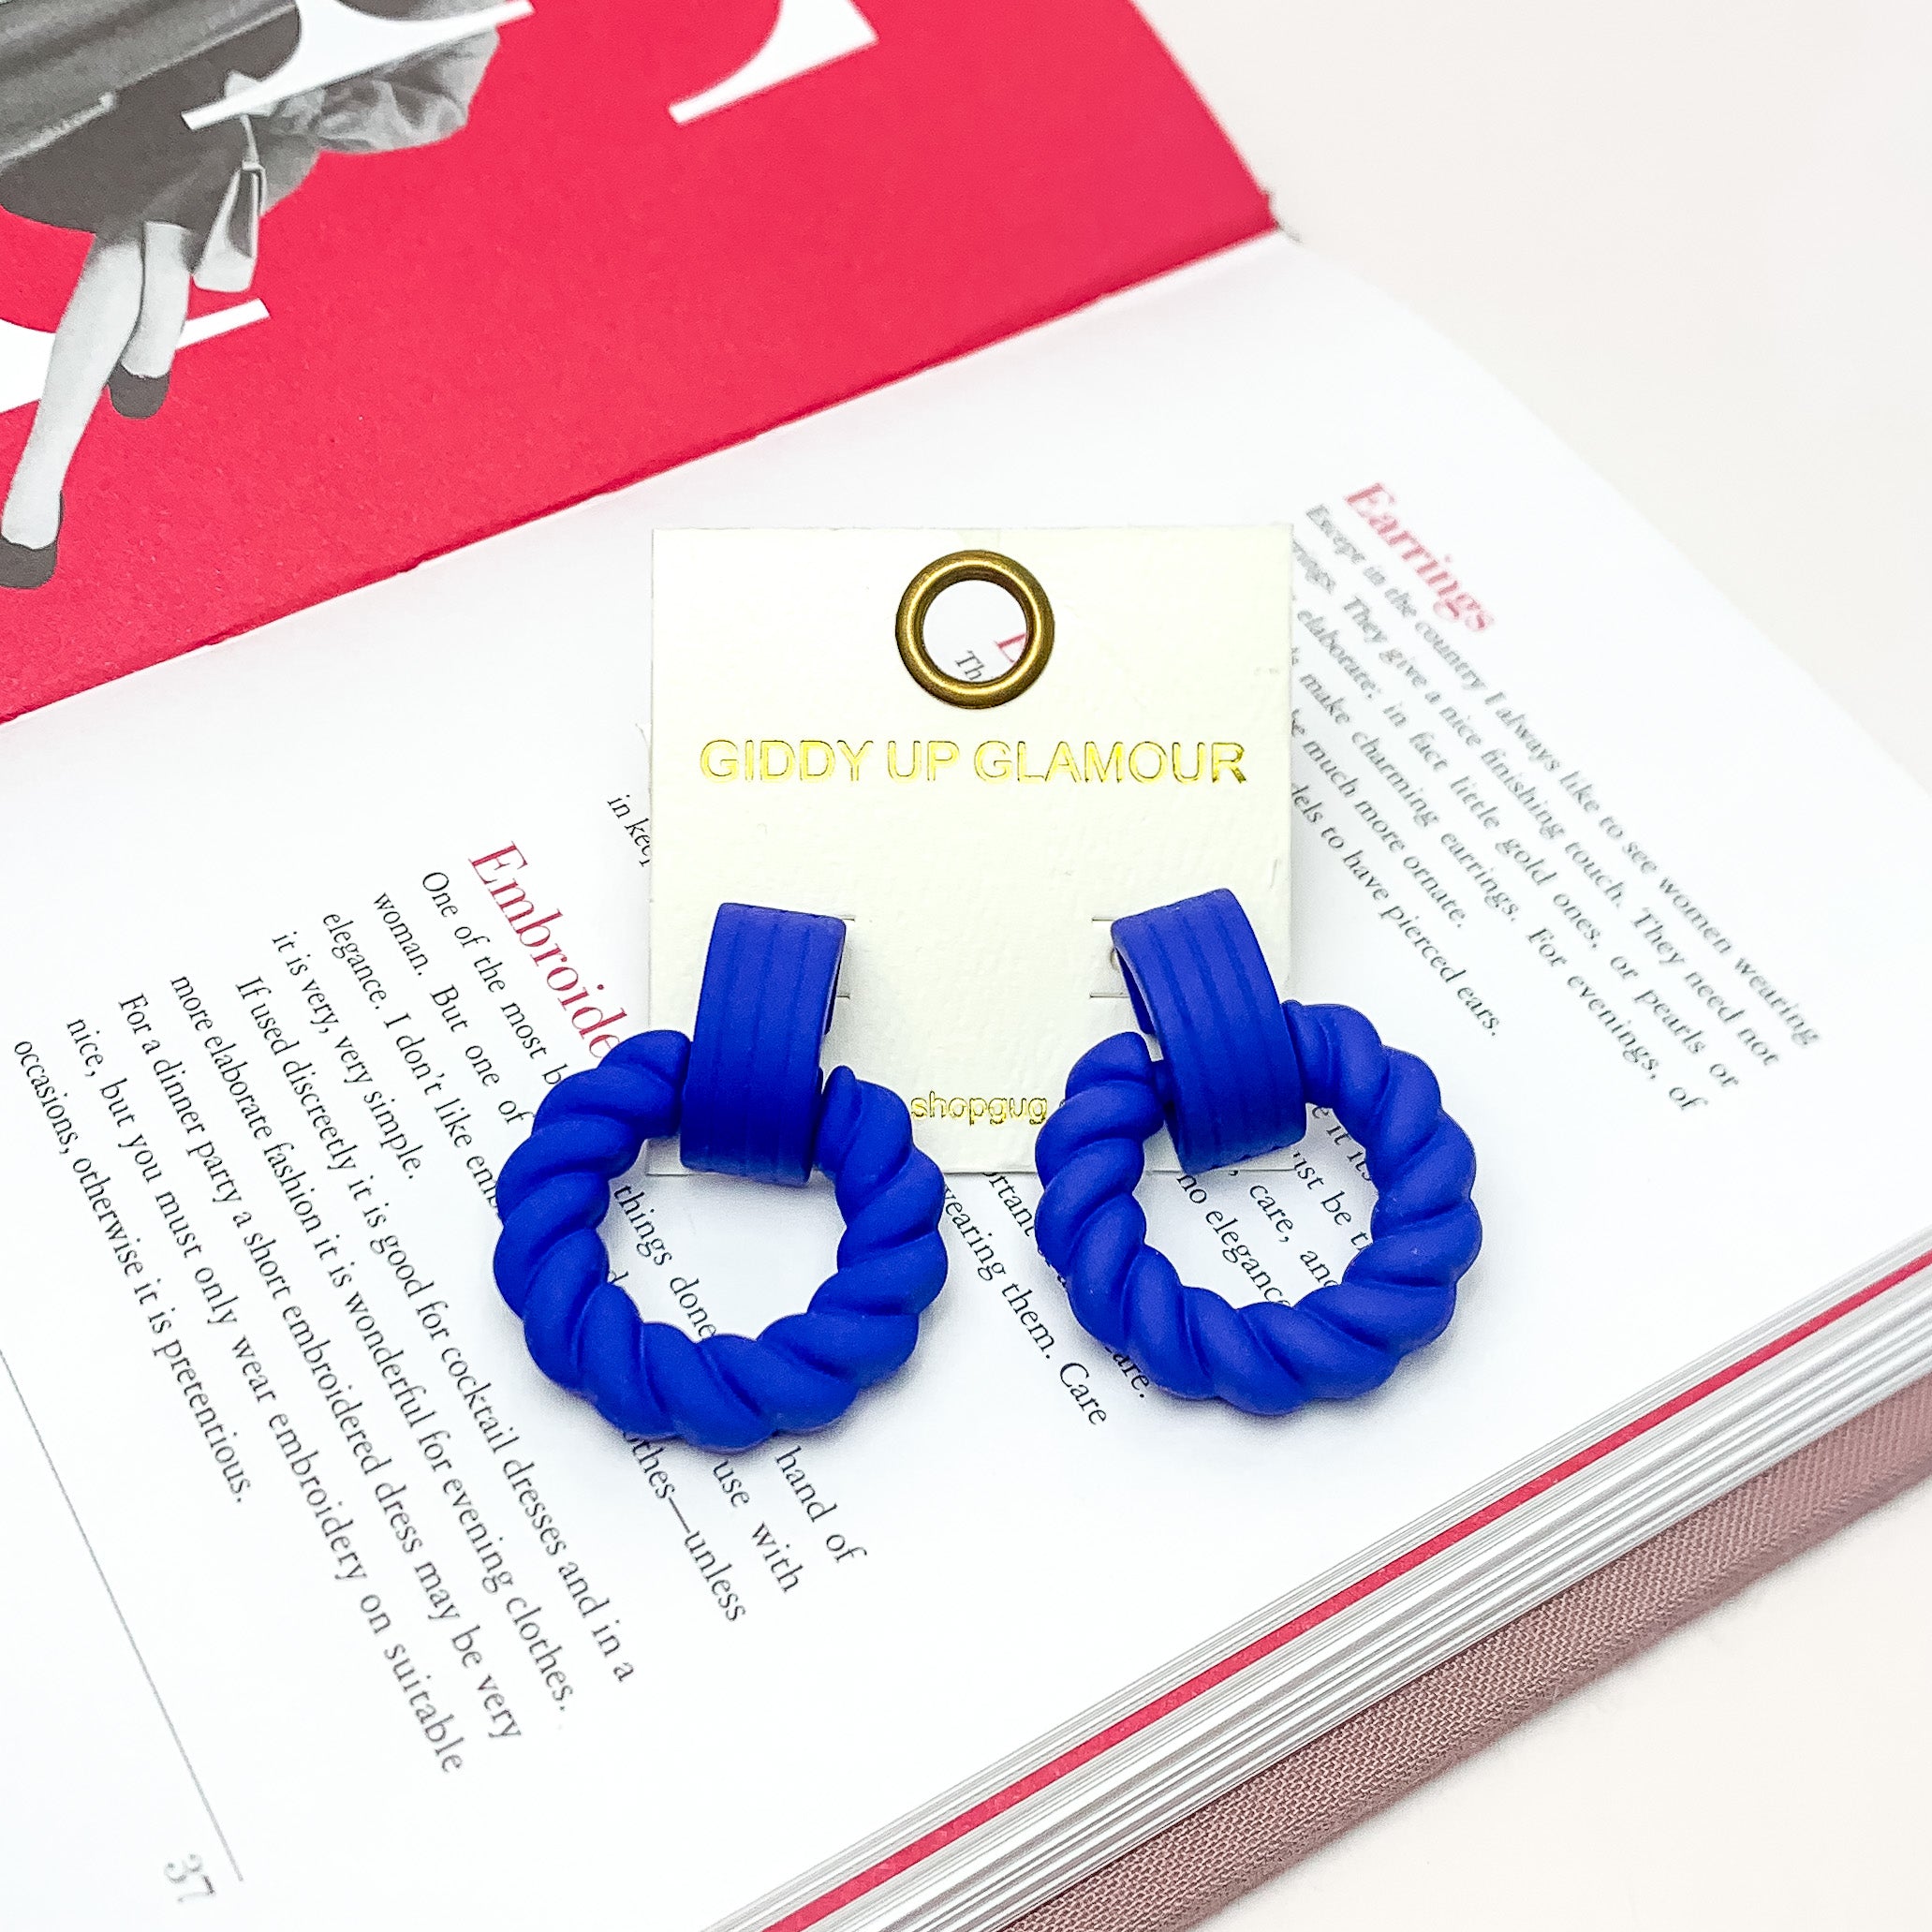 Made to Party Twisted Circle Earrings in Royal Blue. Pictured on an open page of a book.